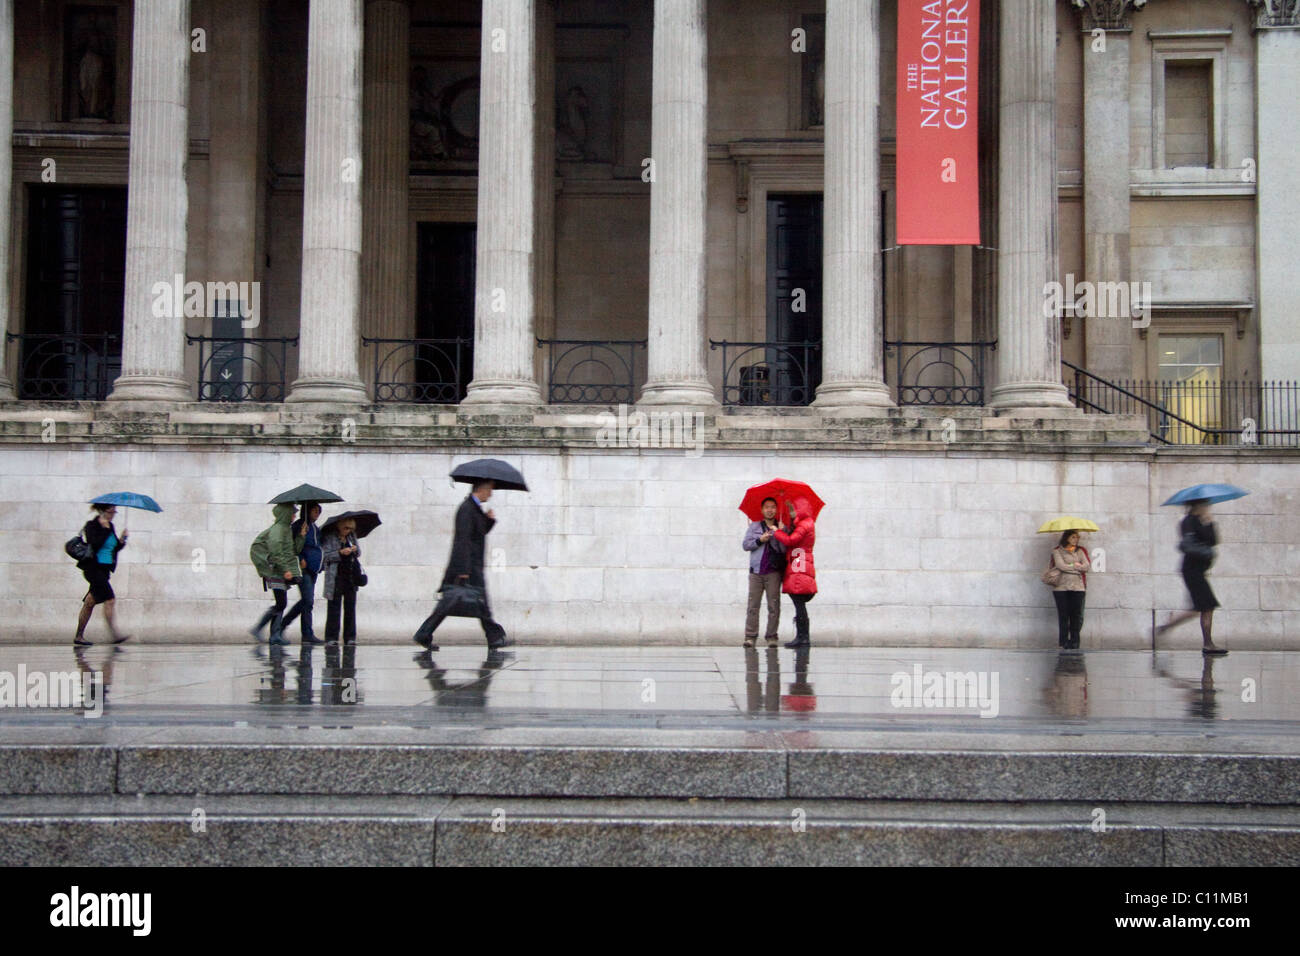 Pedestrians holding umbrellas on a rainy day outside the National Gallery, London Stock Photo